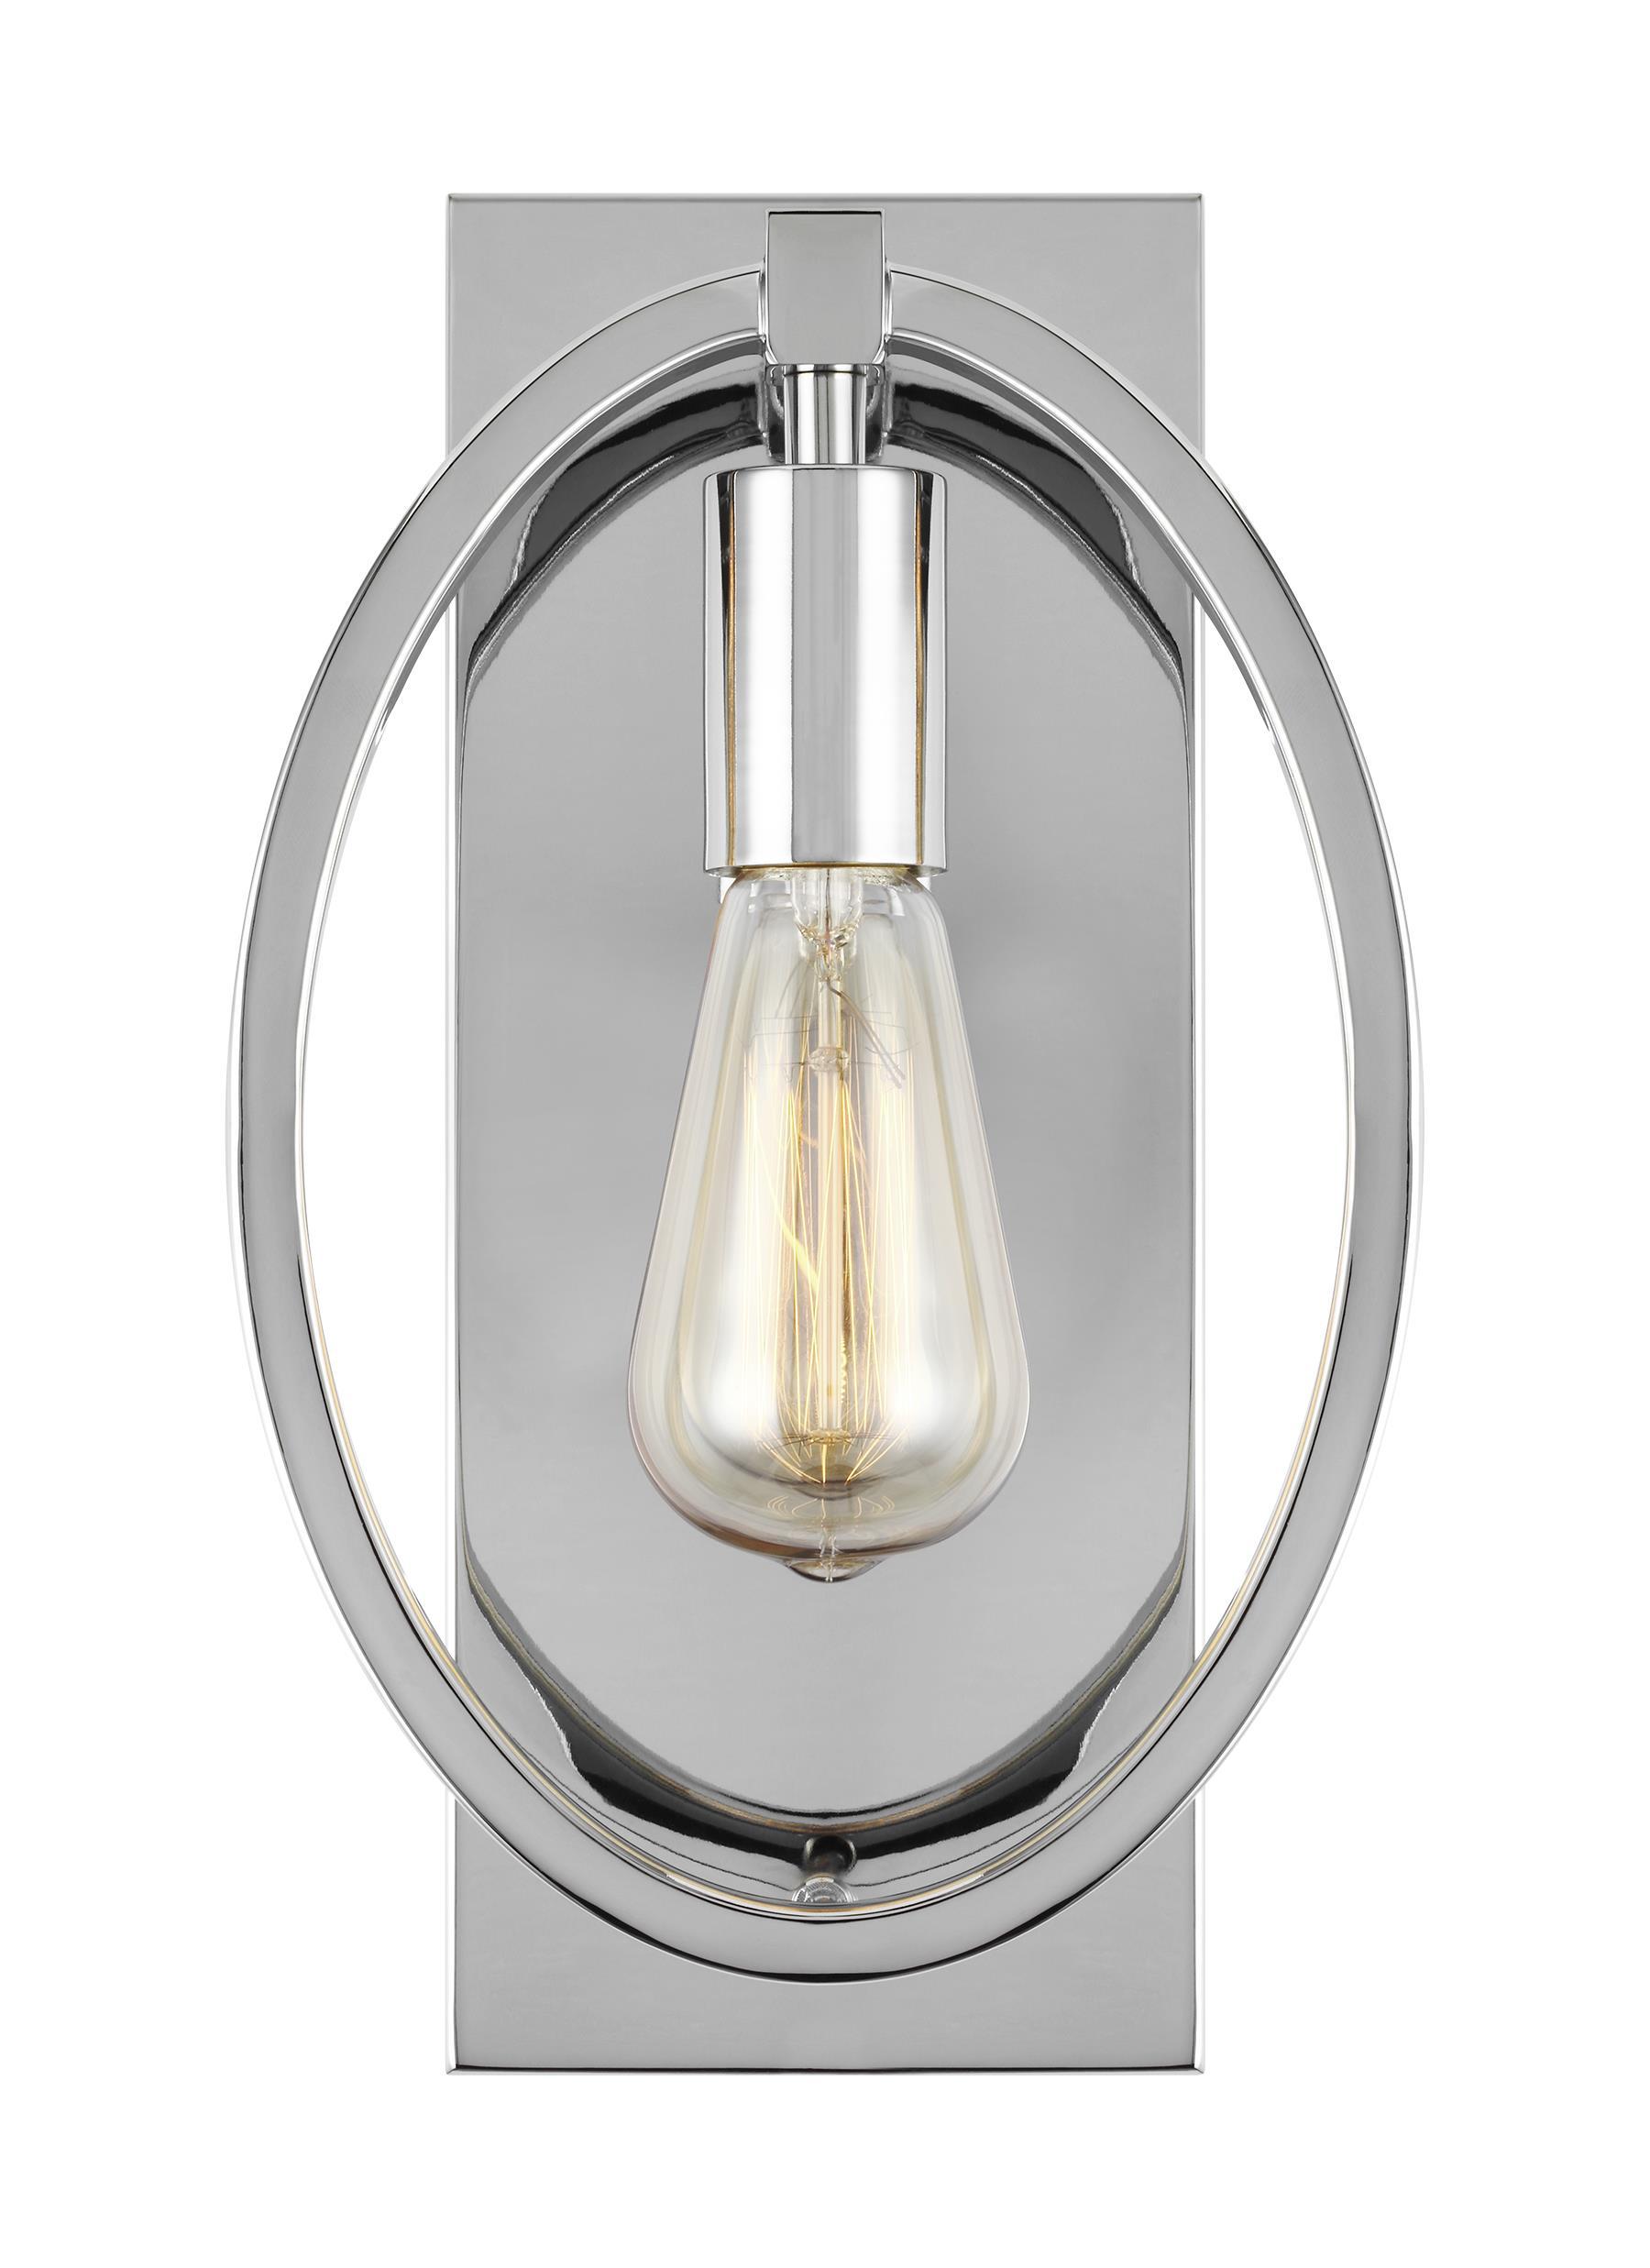 Marlena Chrome 1-Light Wall Sconce Wall Feiss 